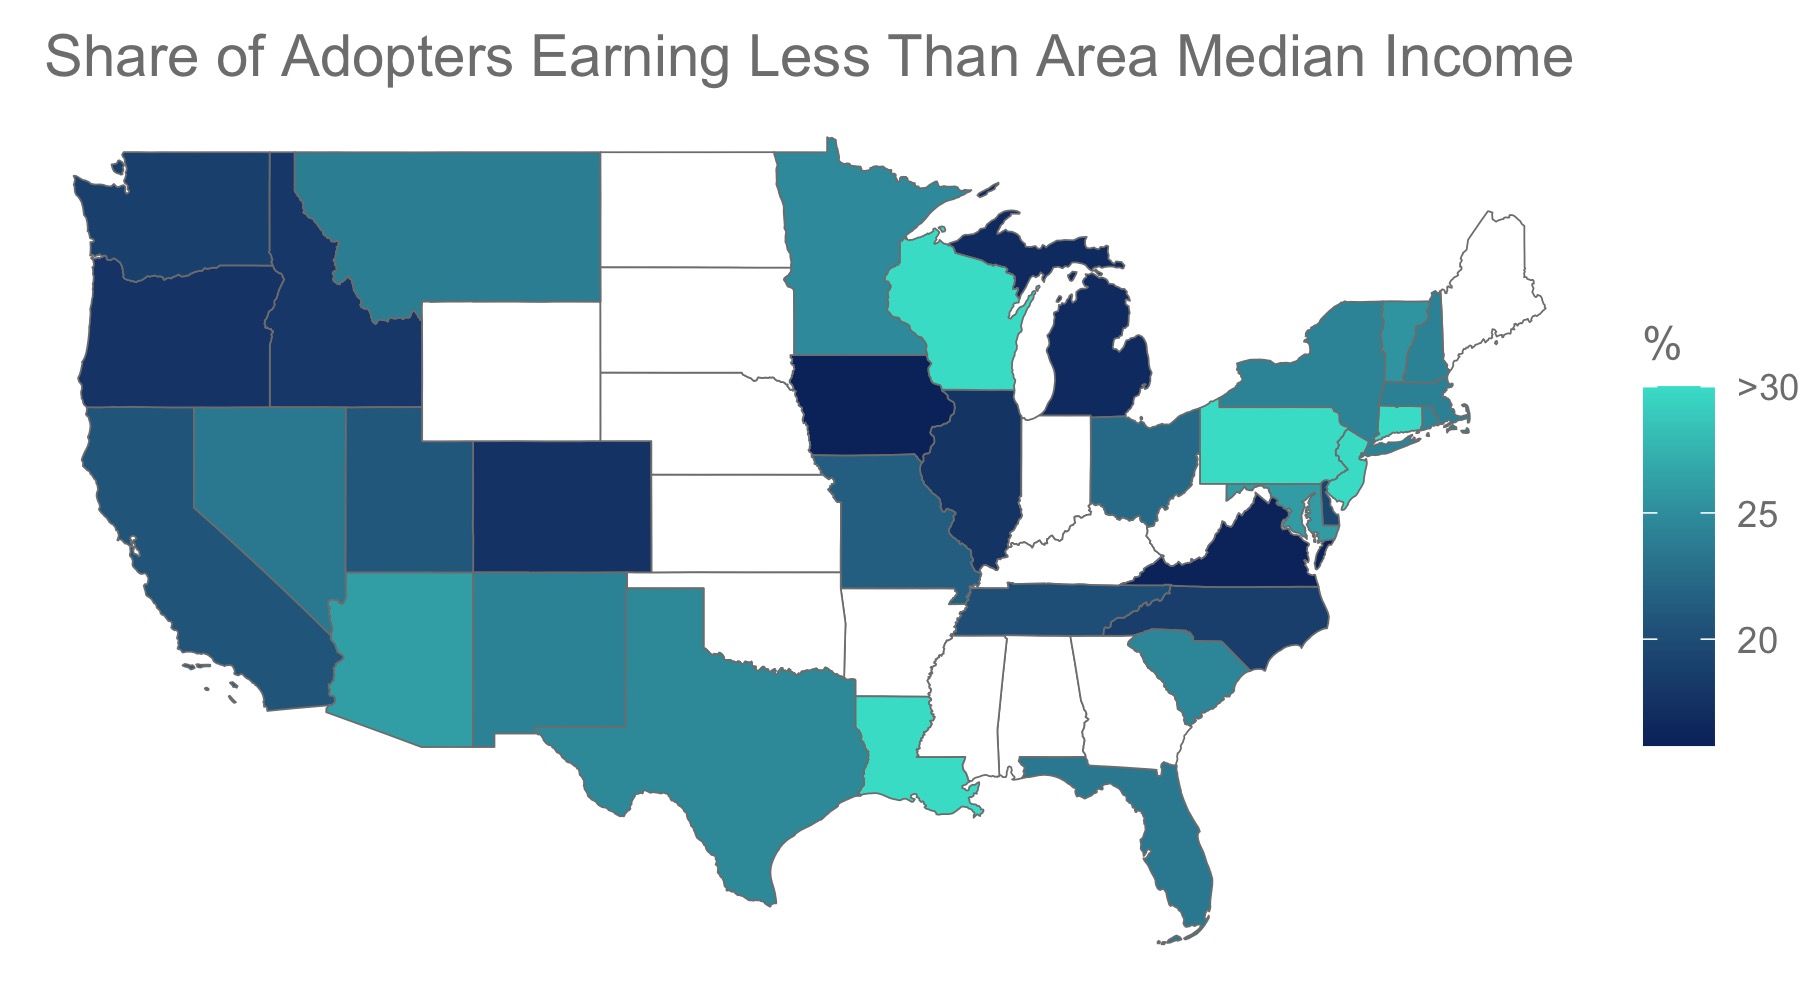 US map showing share of PV adopters with income less than area median